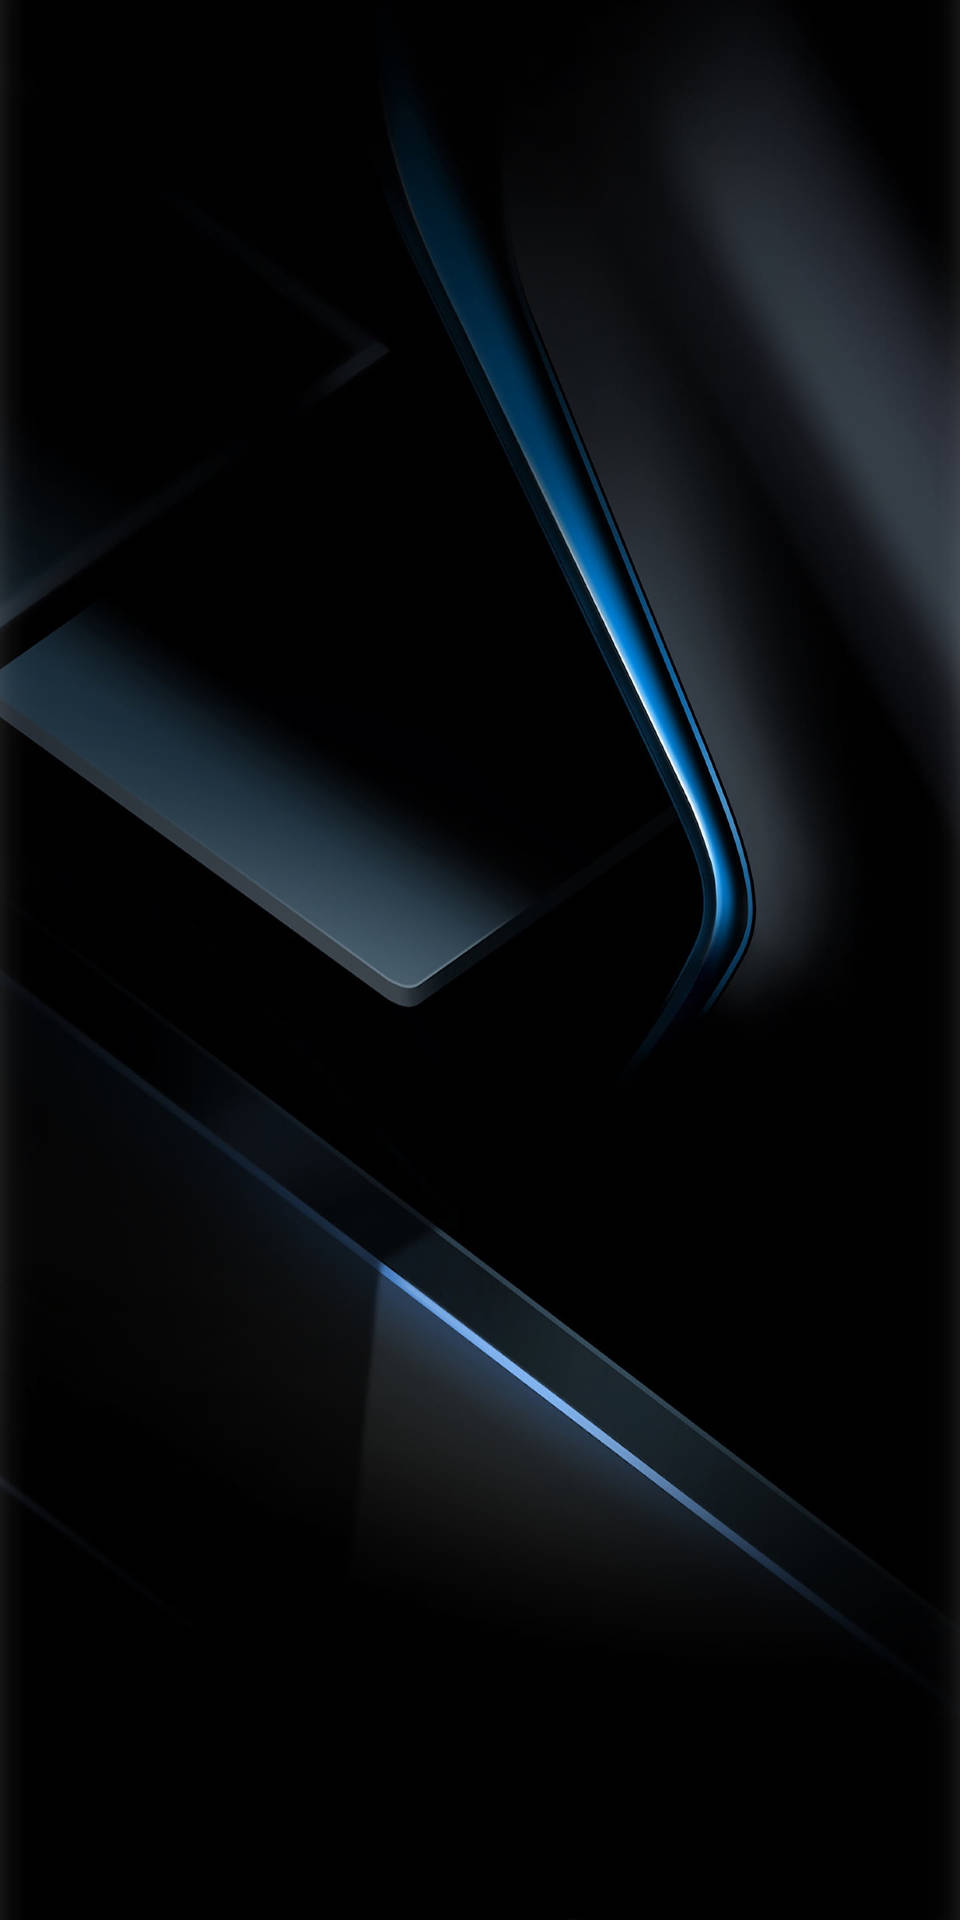 Exceptional Geometric Design In Blue And Black On Samsung Full Hd